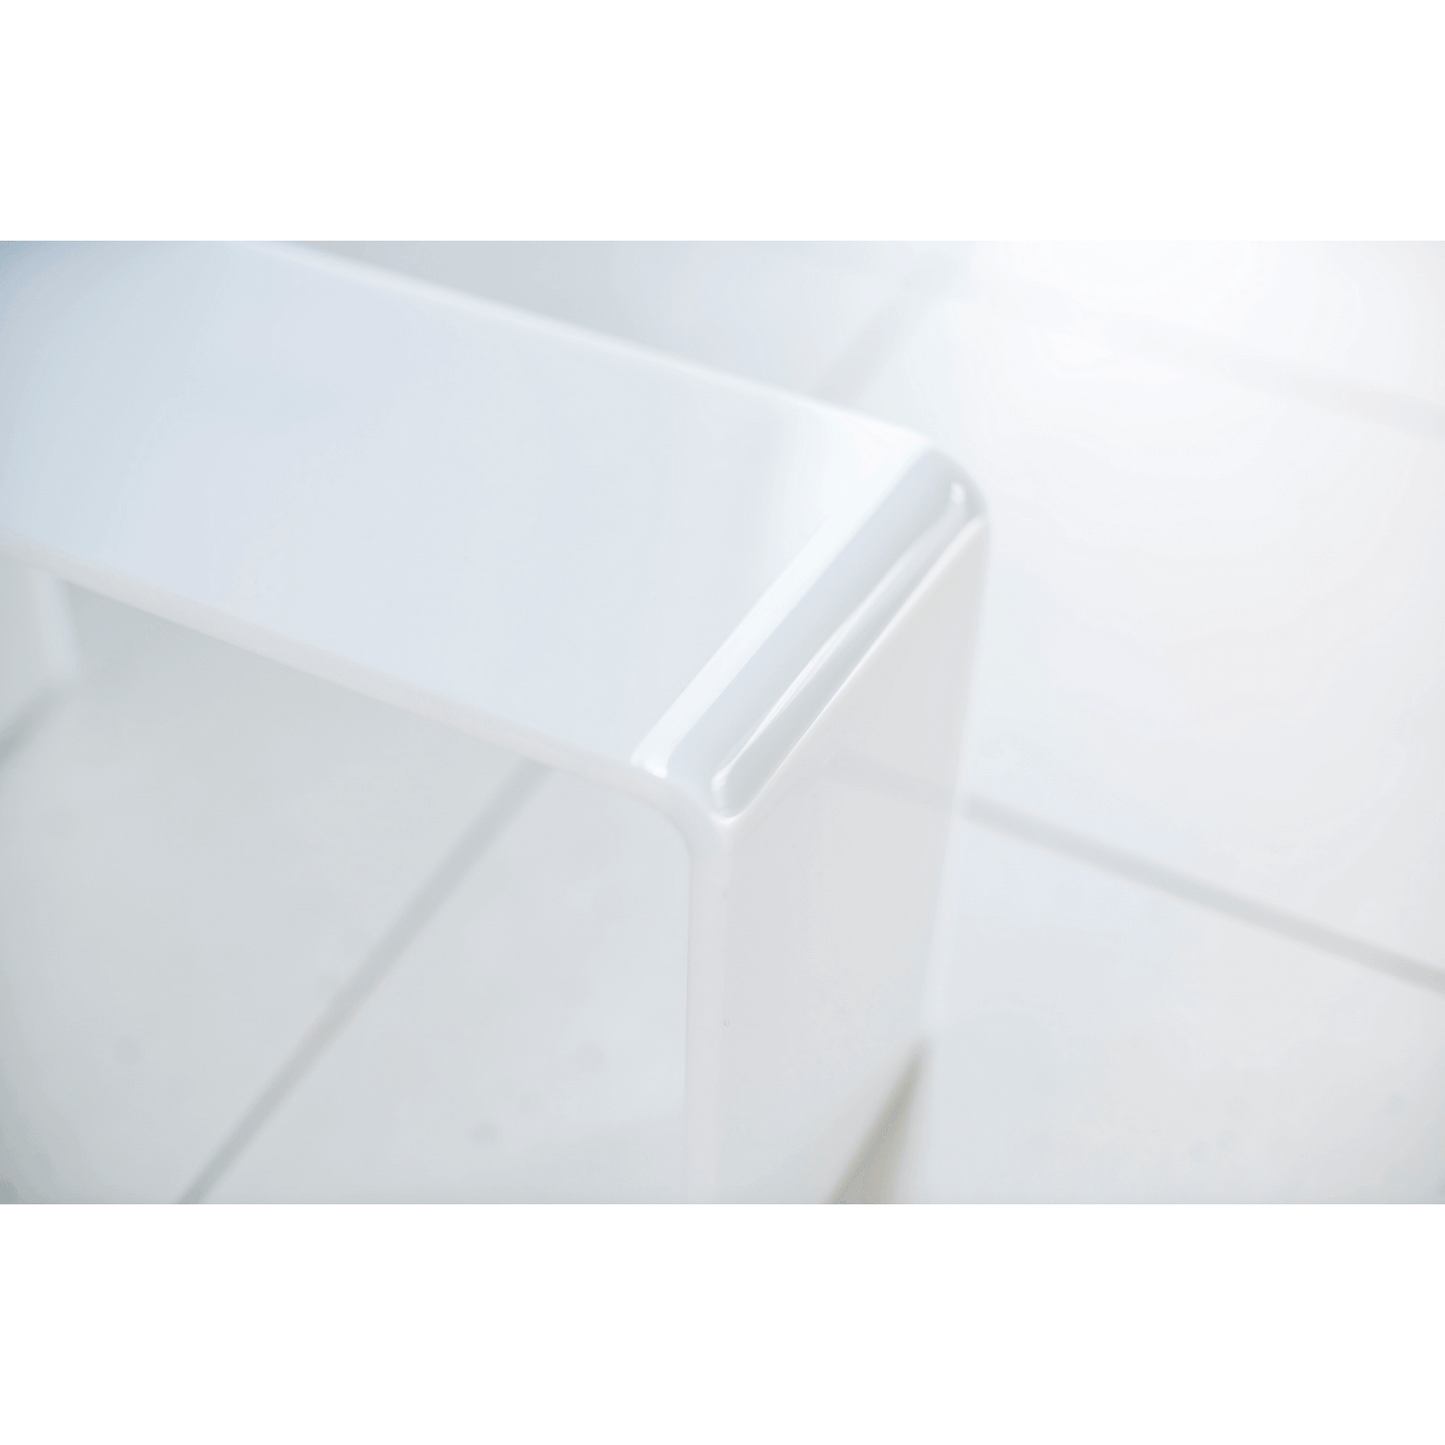 The PROPPR Acer - White Toilet Foot Stool - top angled view